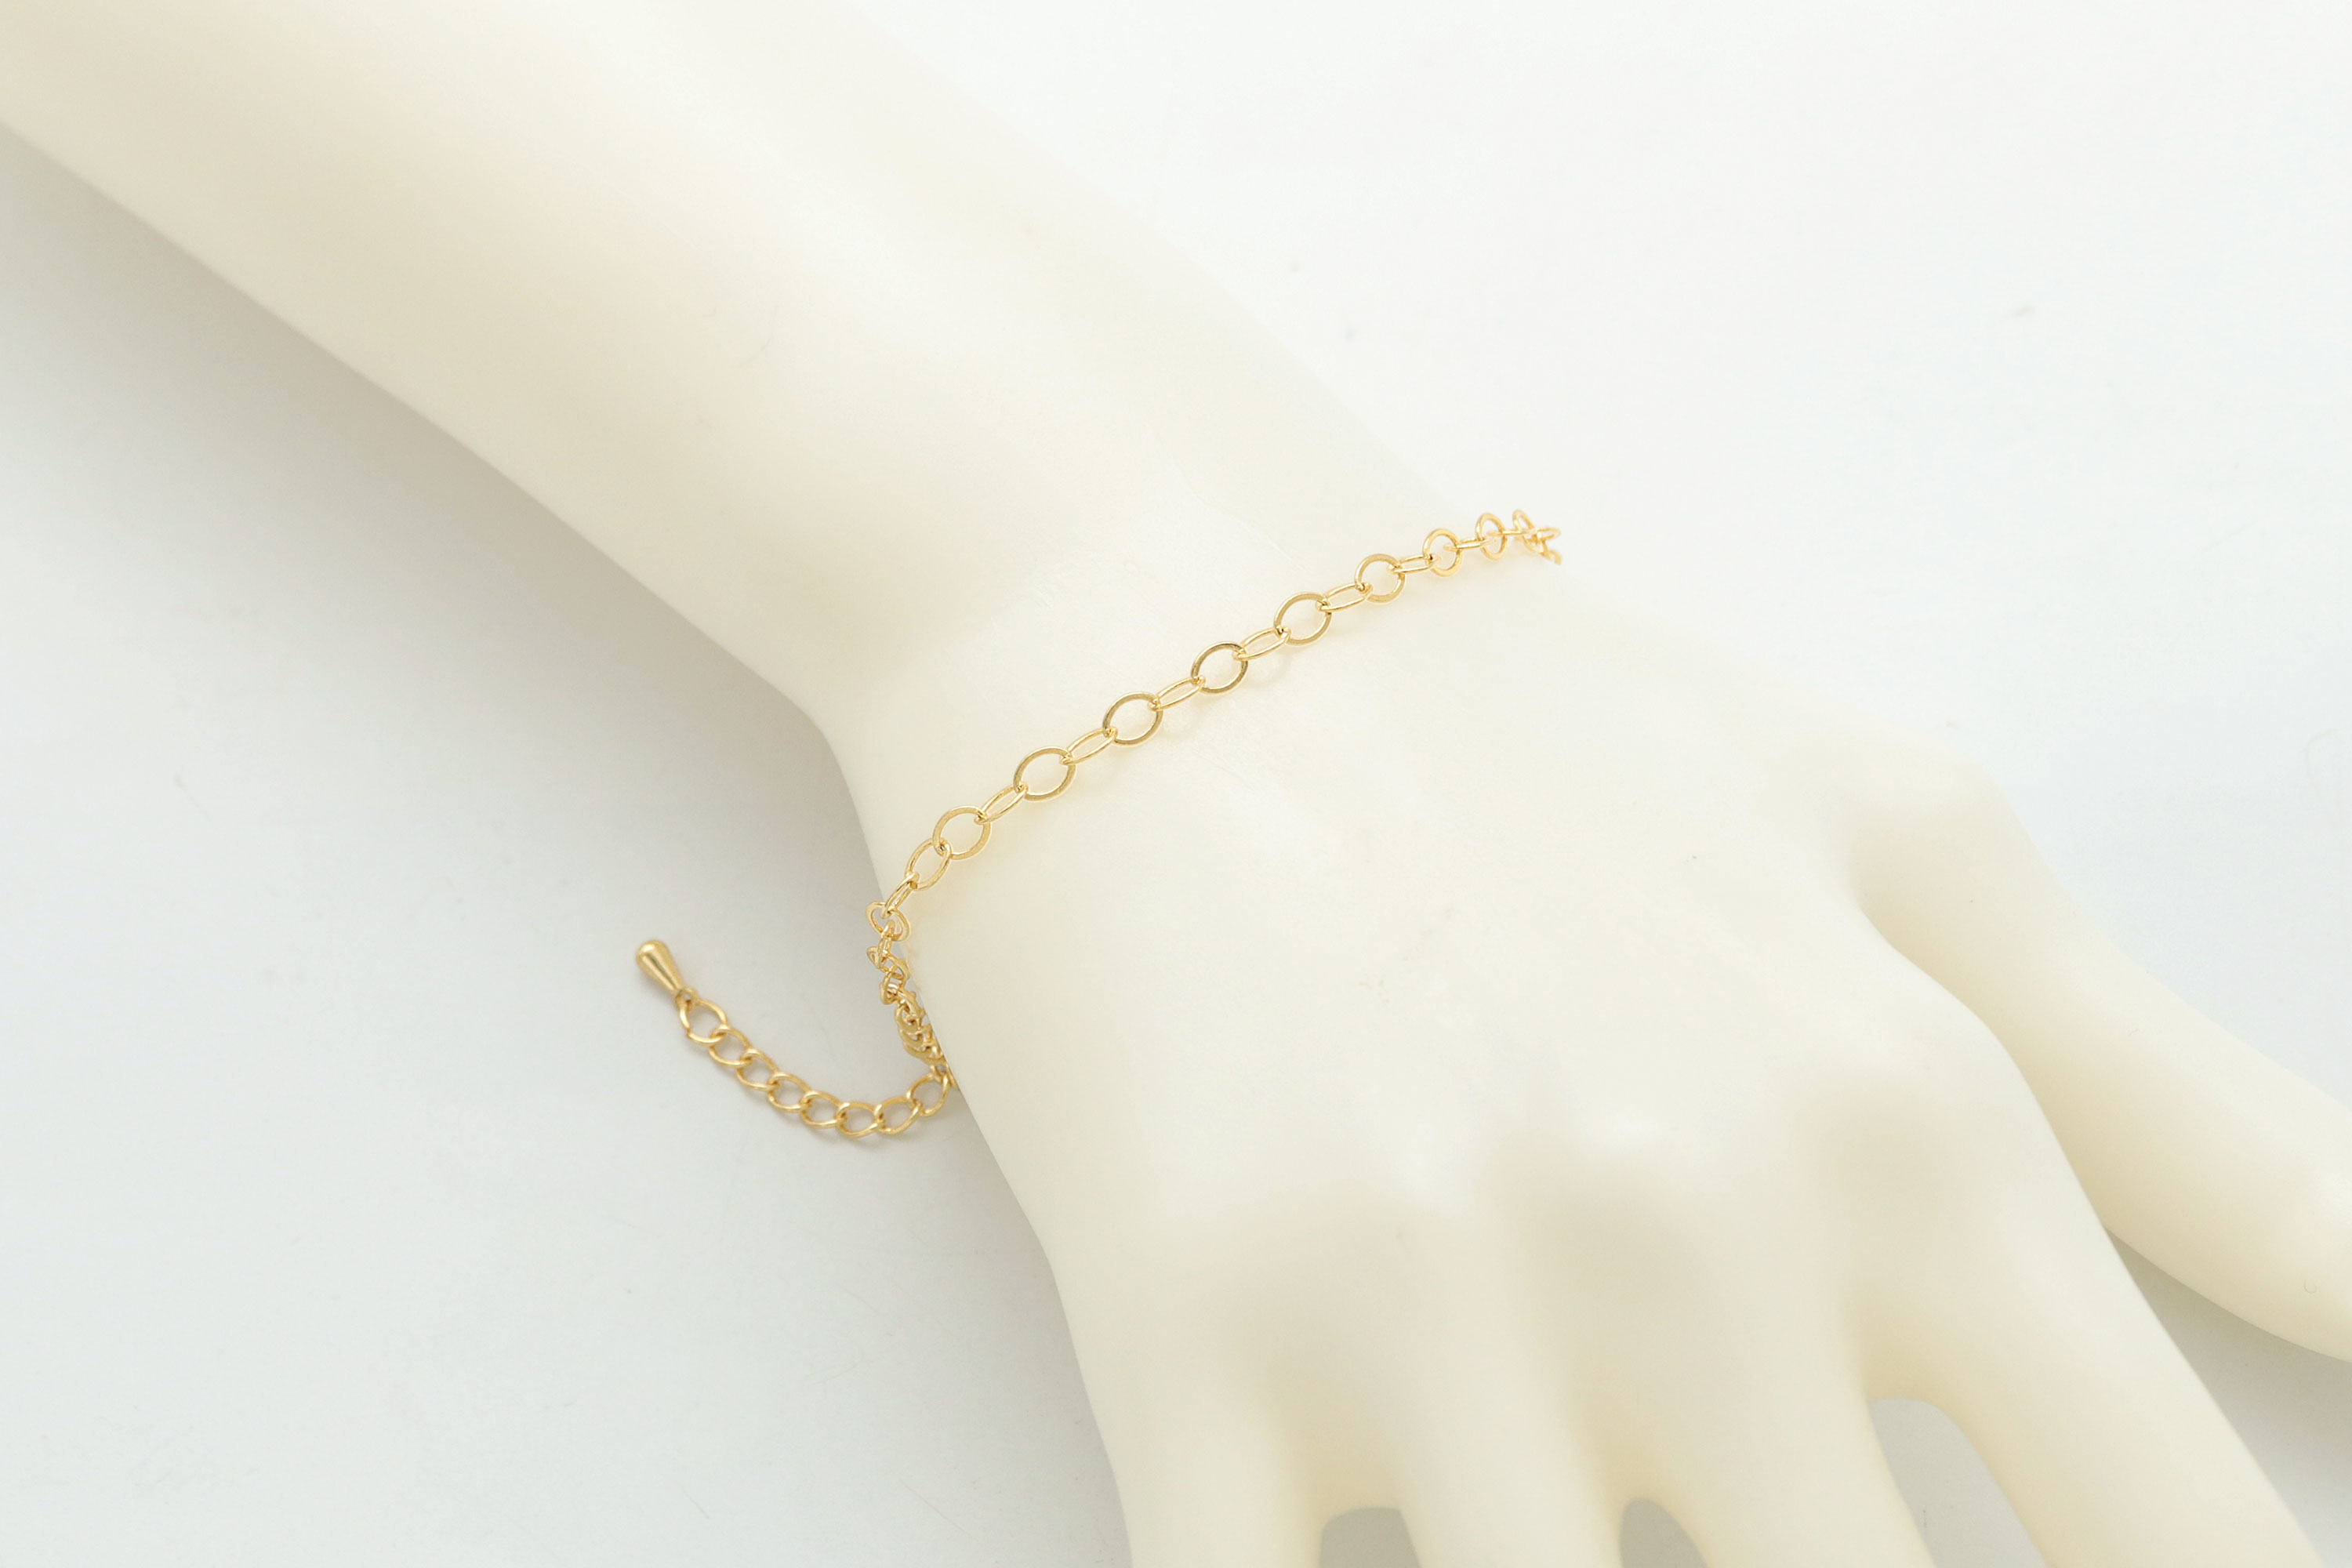 Flat oval link chain bracelet for charms